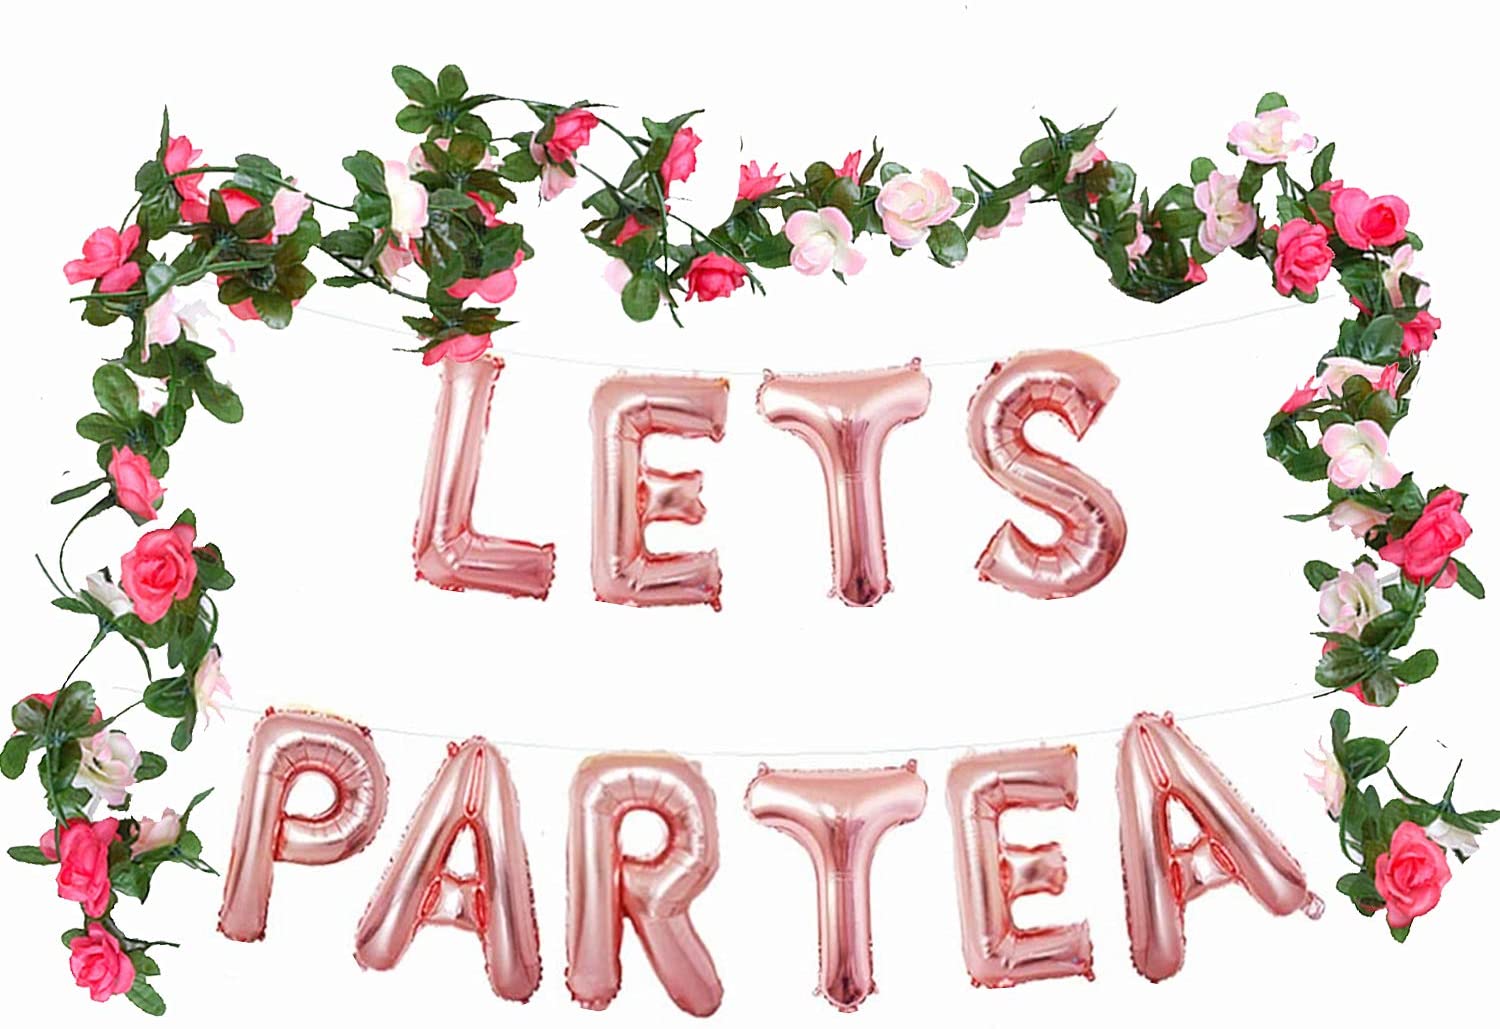 tea-party-ideas-for-kids-banner-balloons